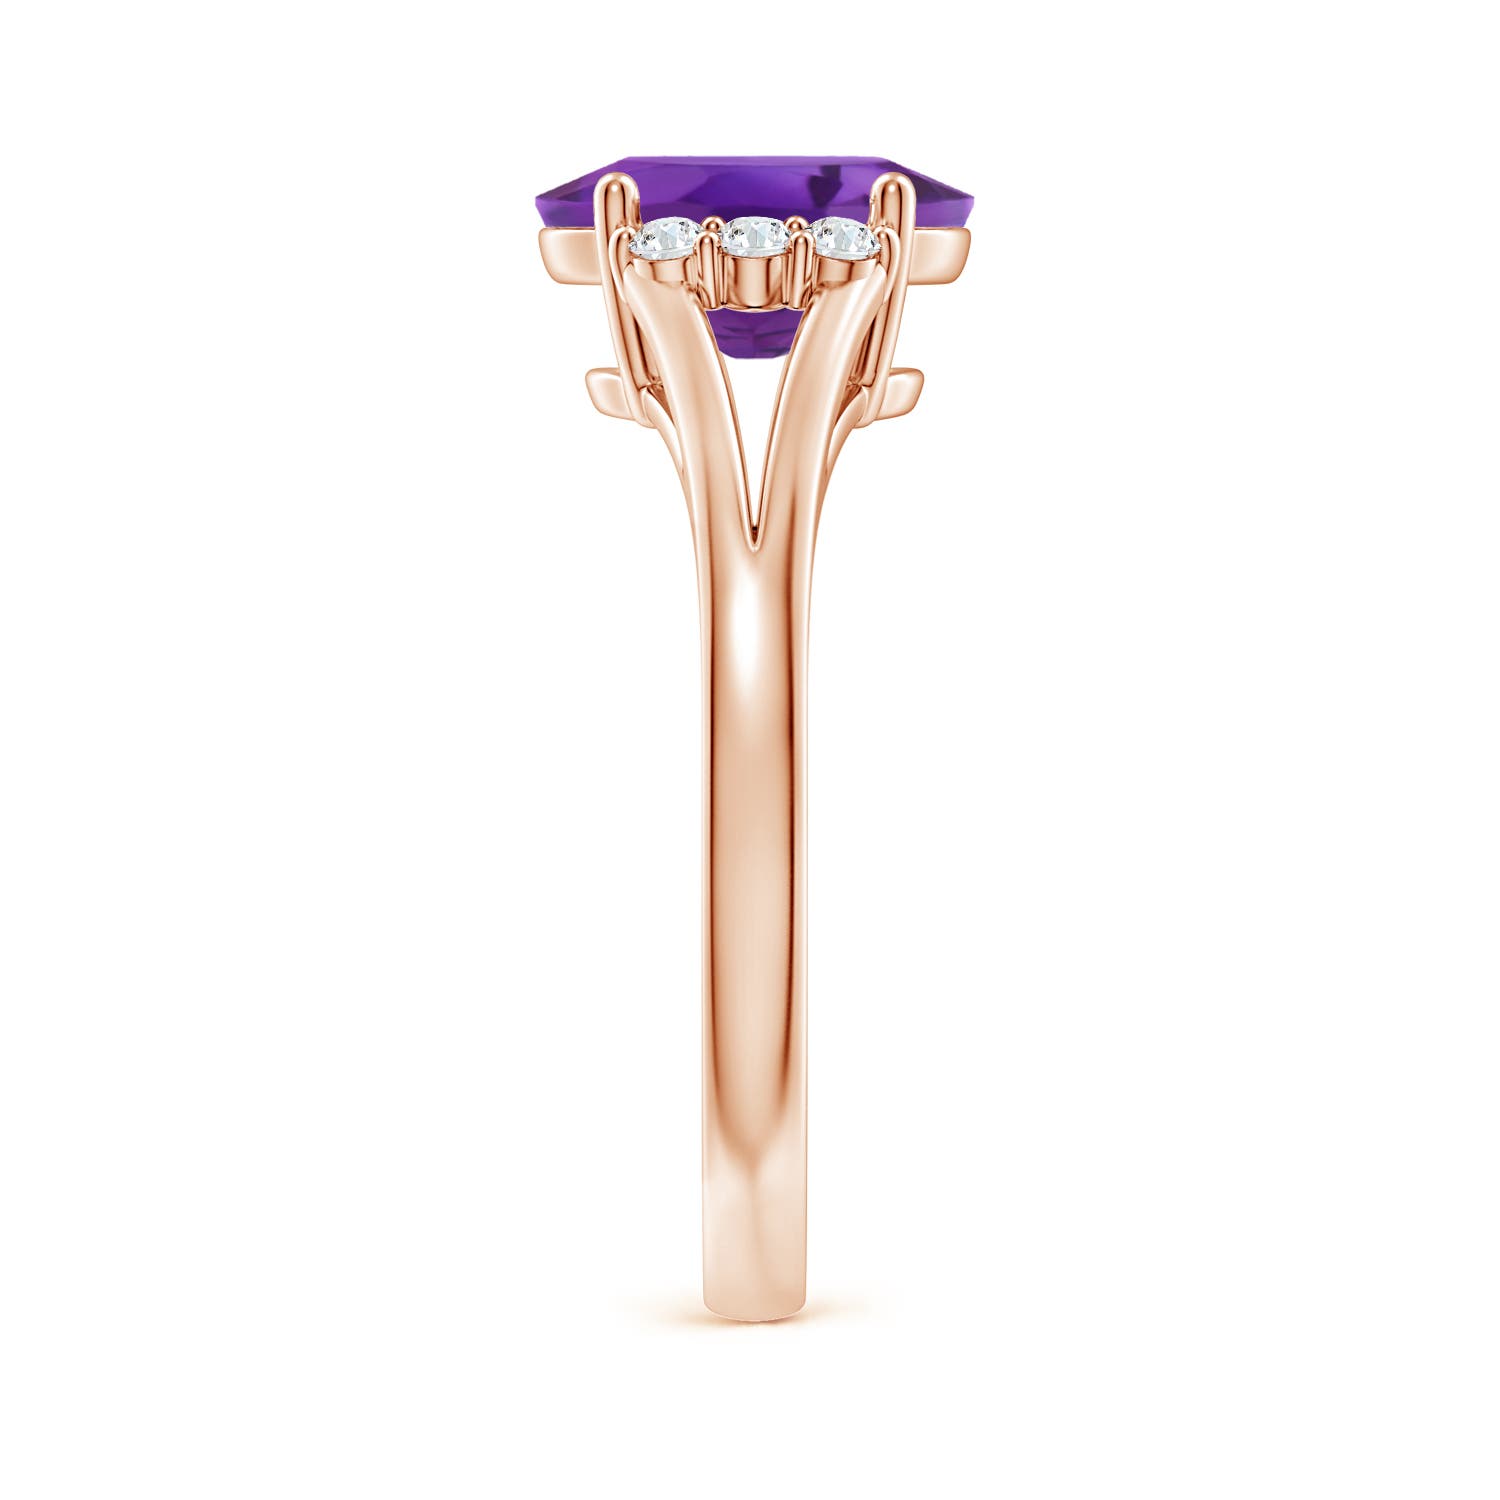 AAA - Amethyst / 1.71 CT / 14 KT Rose Gold